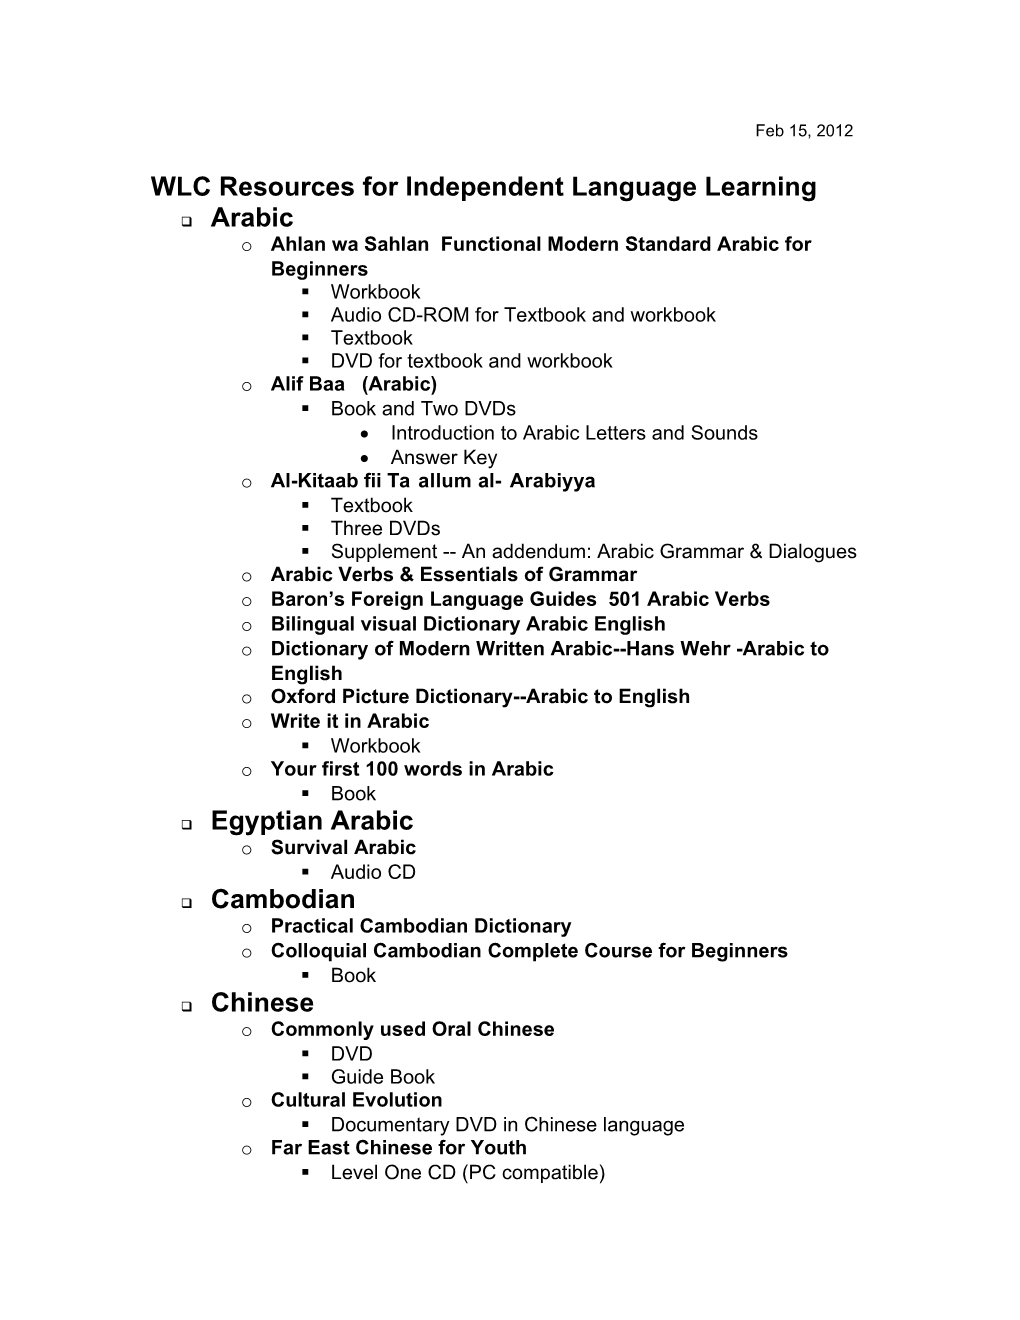 WLC Resources for Independent Language Learning